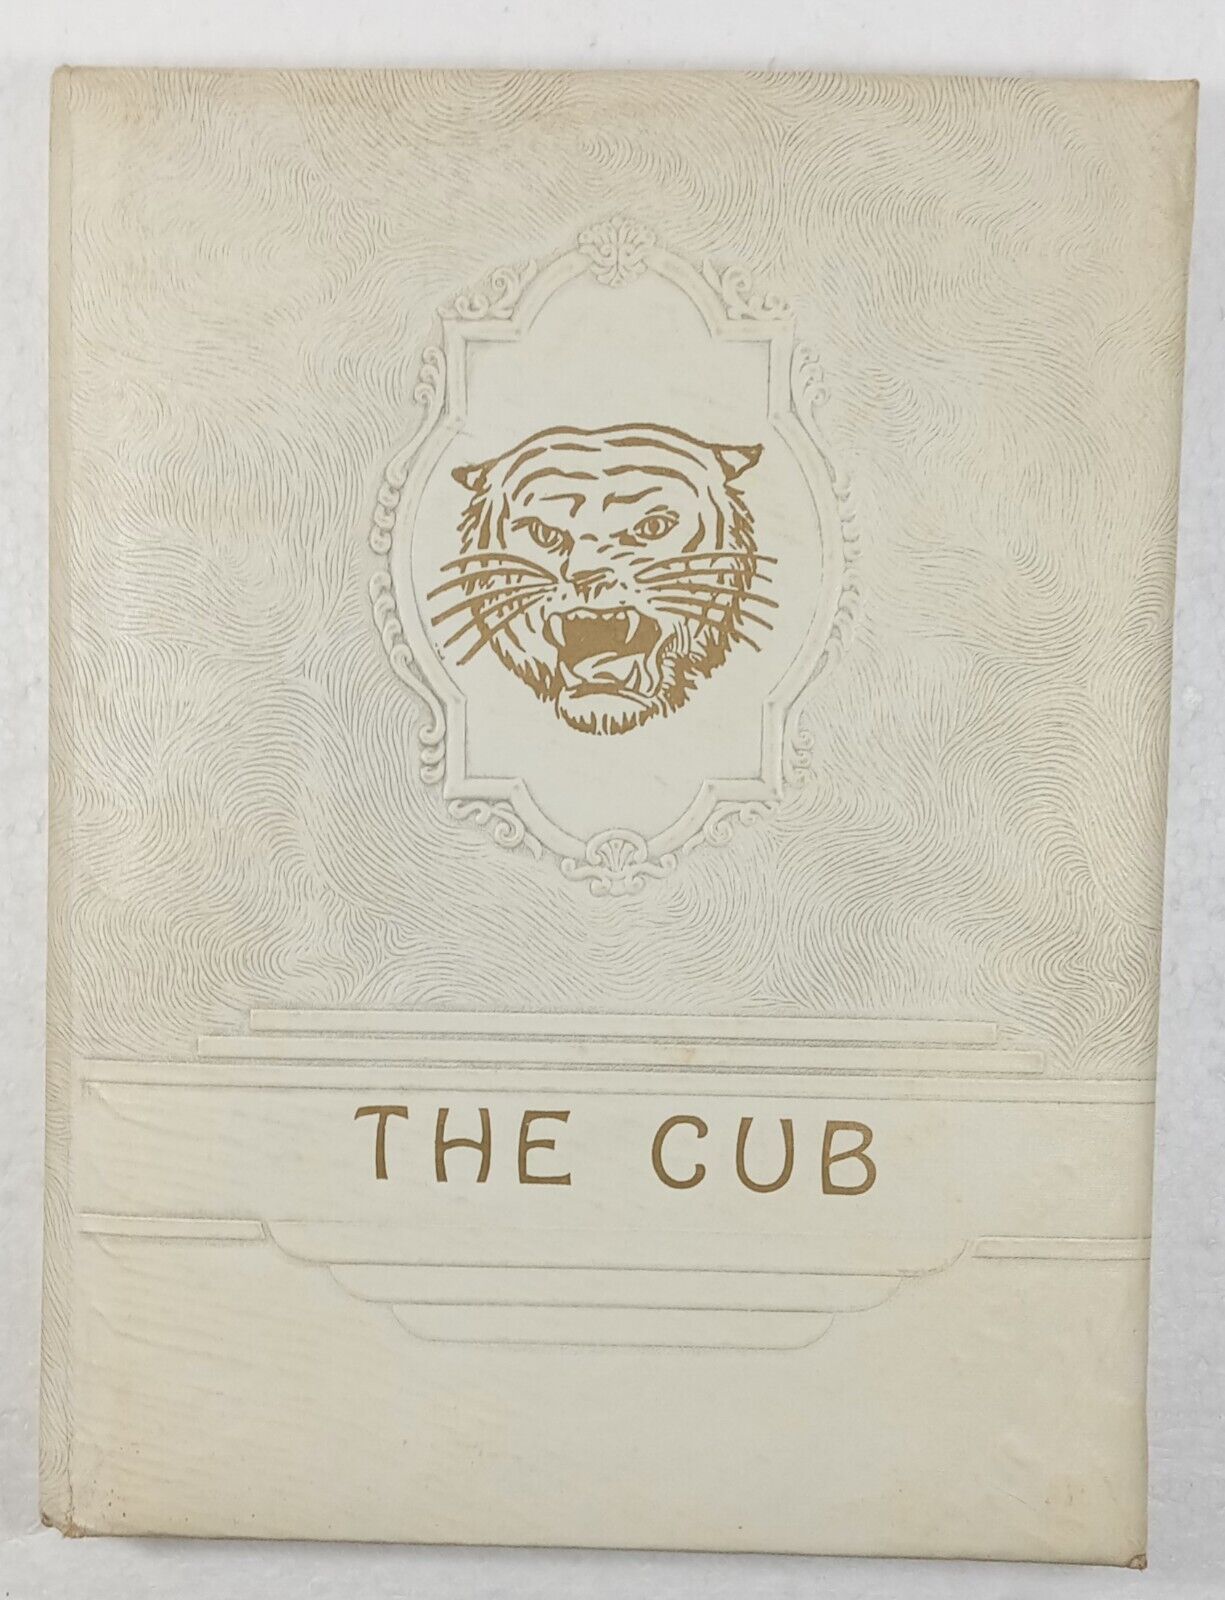 The CUB HOT SPRINGS HIGH SCHOOL YEAR BOOK 1949 Hot Springs New Mexico Written In